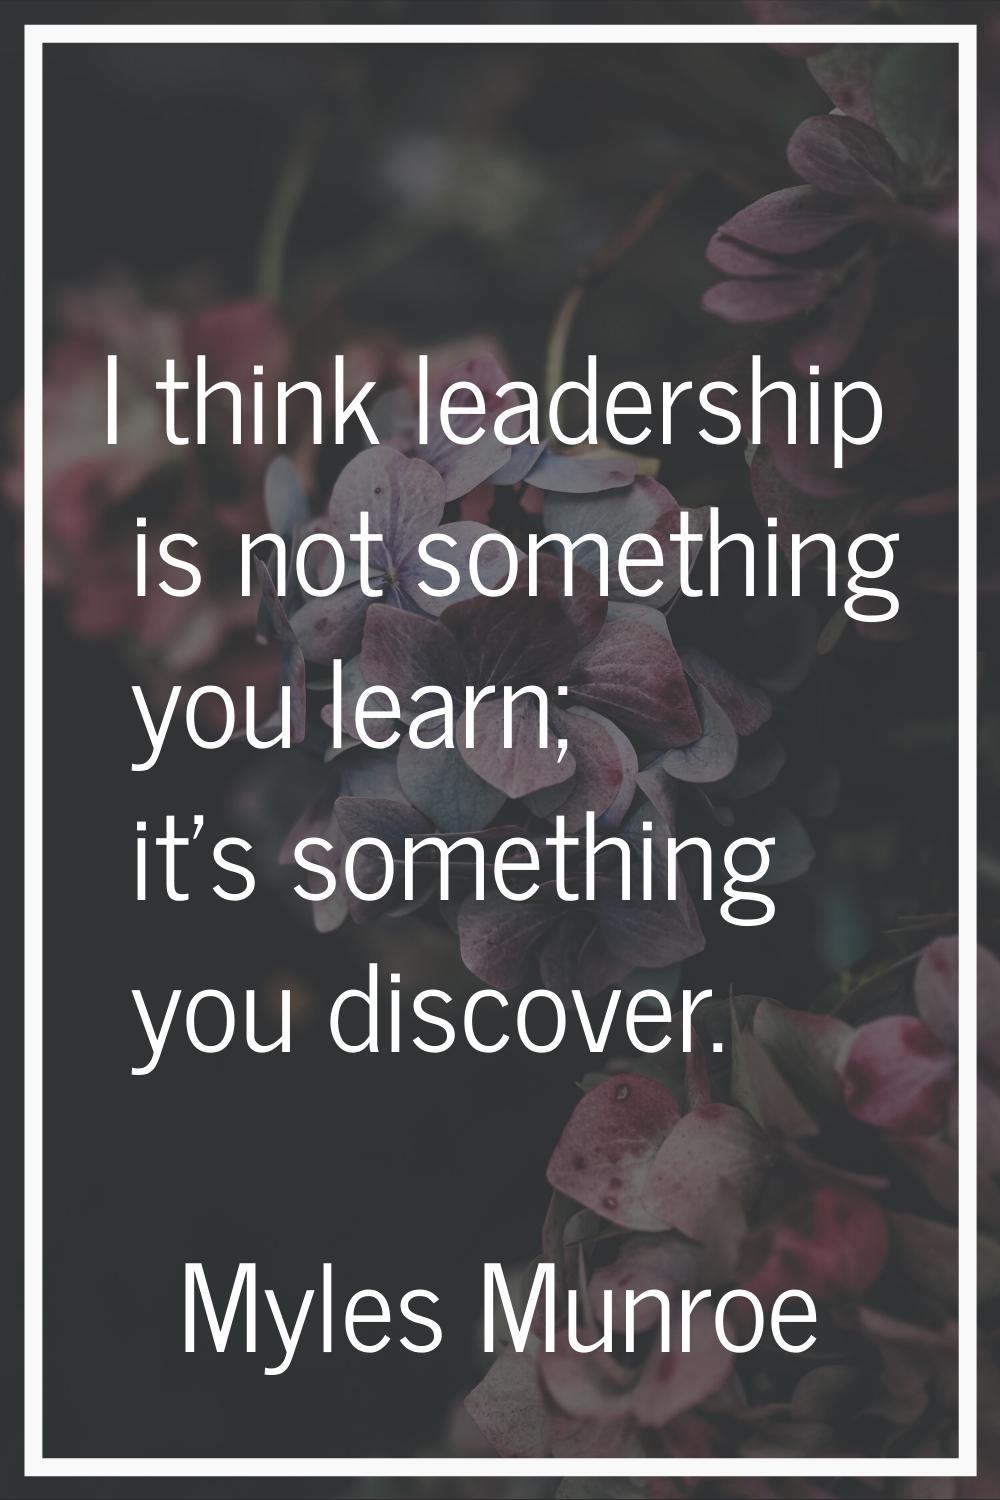 I think leadership is not something you learn; it's something you discover.